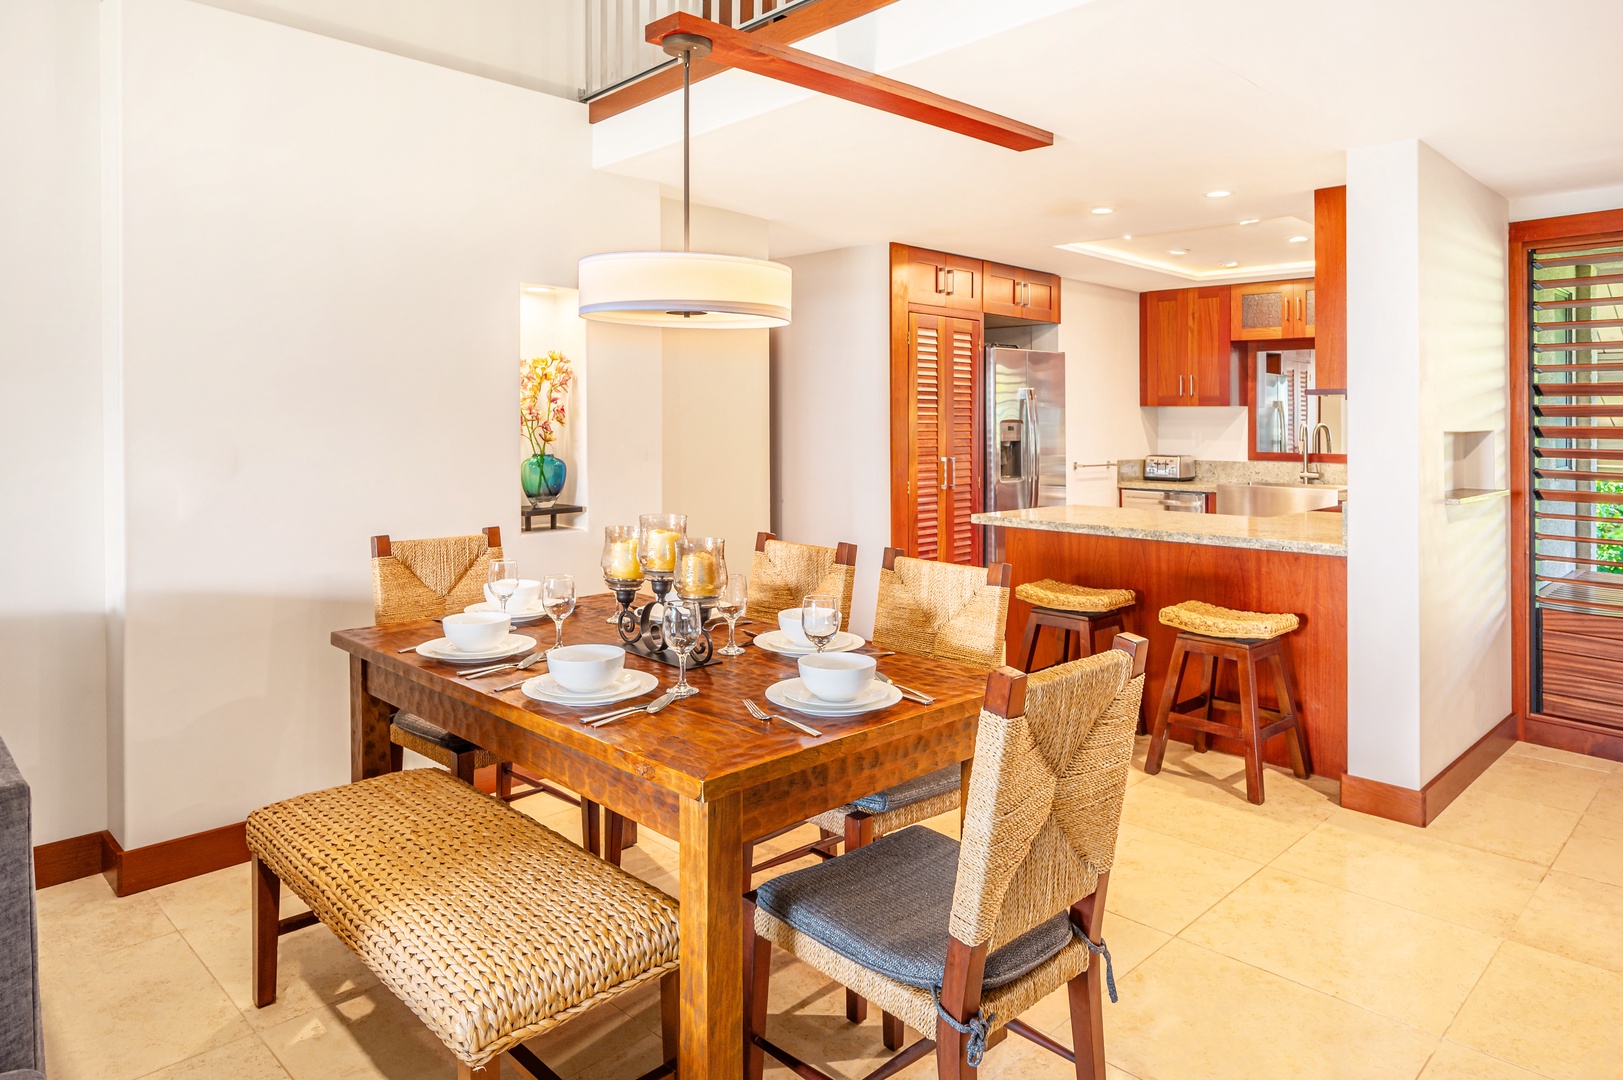 Princeville Vacation Rentals, Hanalei Bay Resort 7307 - You and your friends will love to gather around the dining table